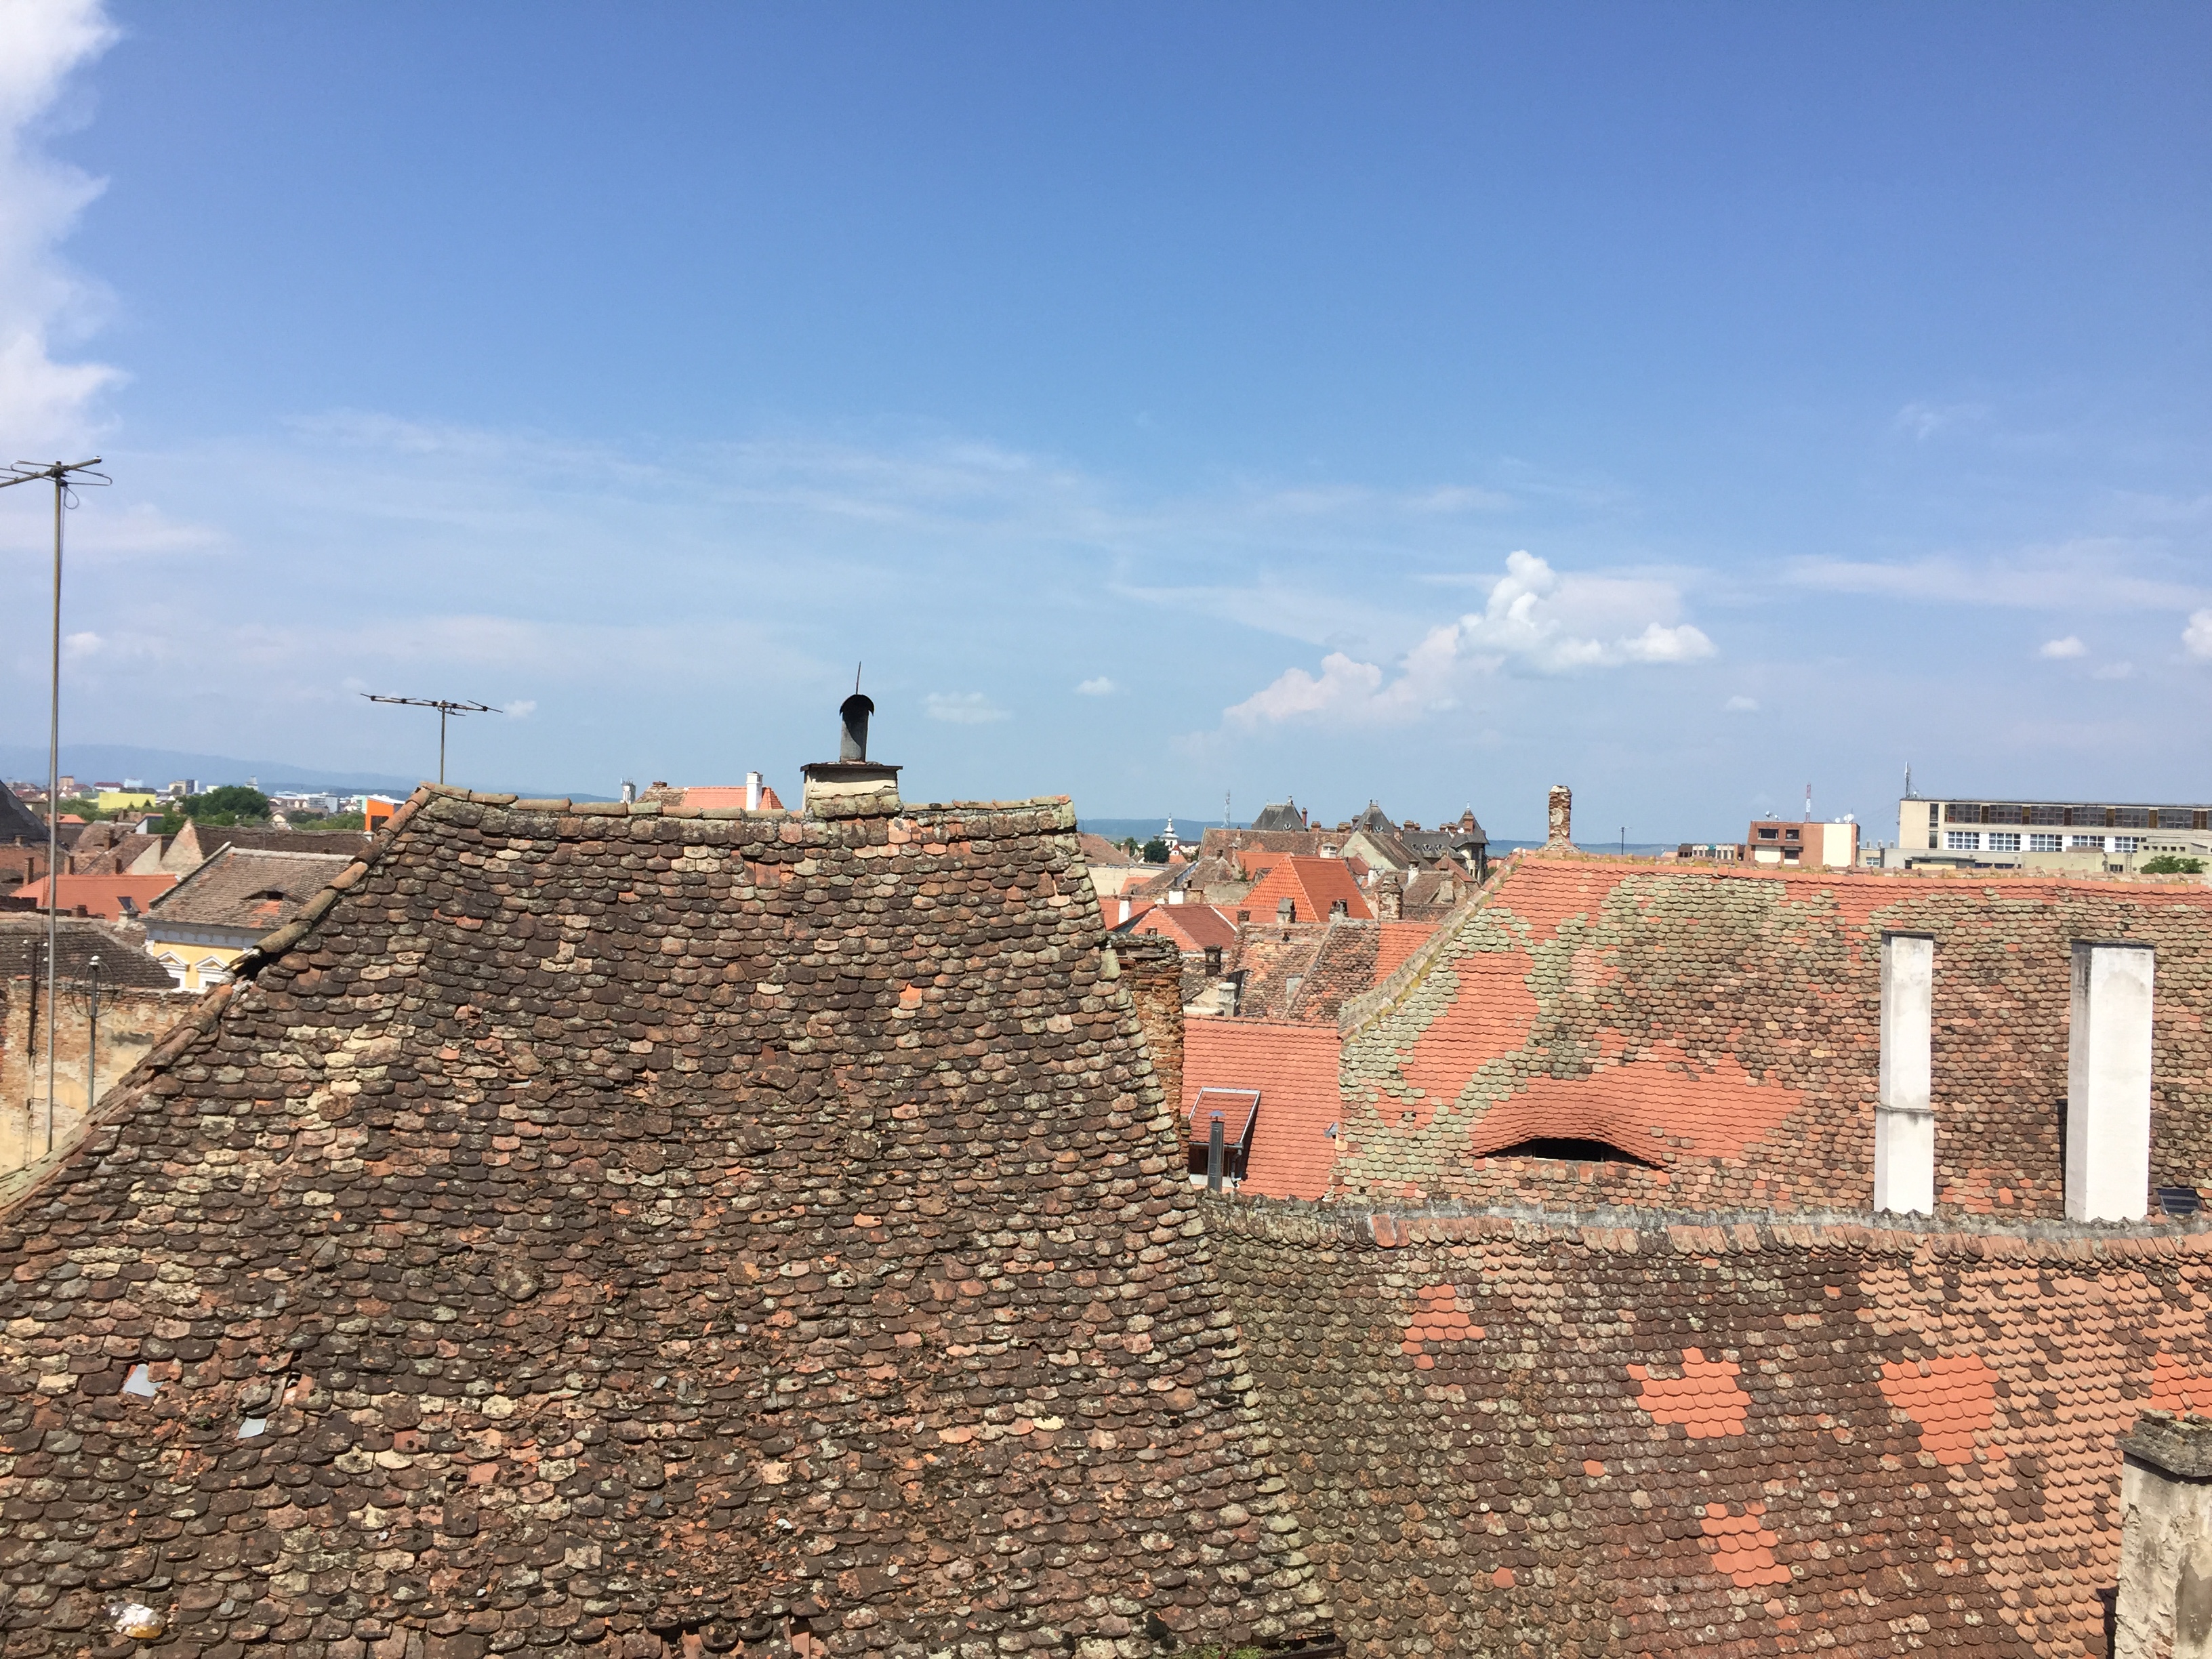 The roofs of Sibiu